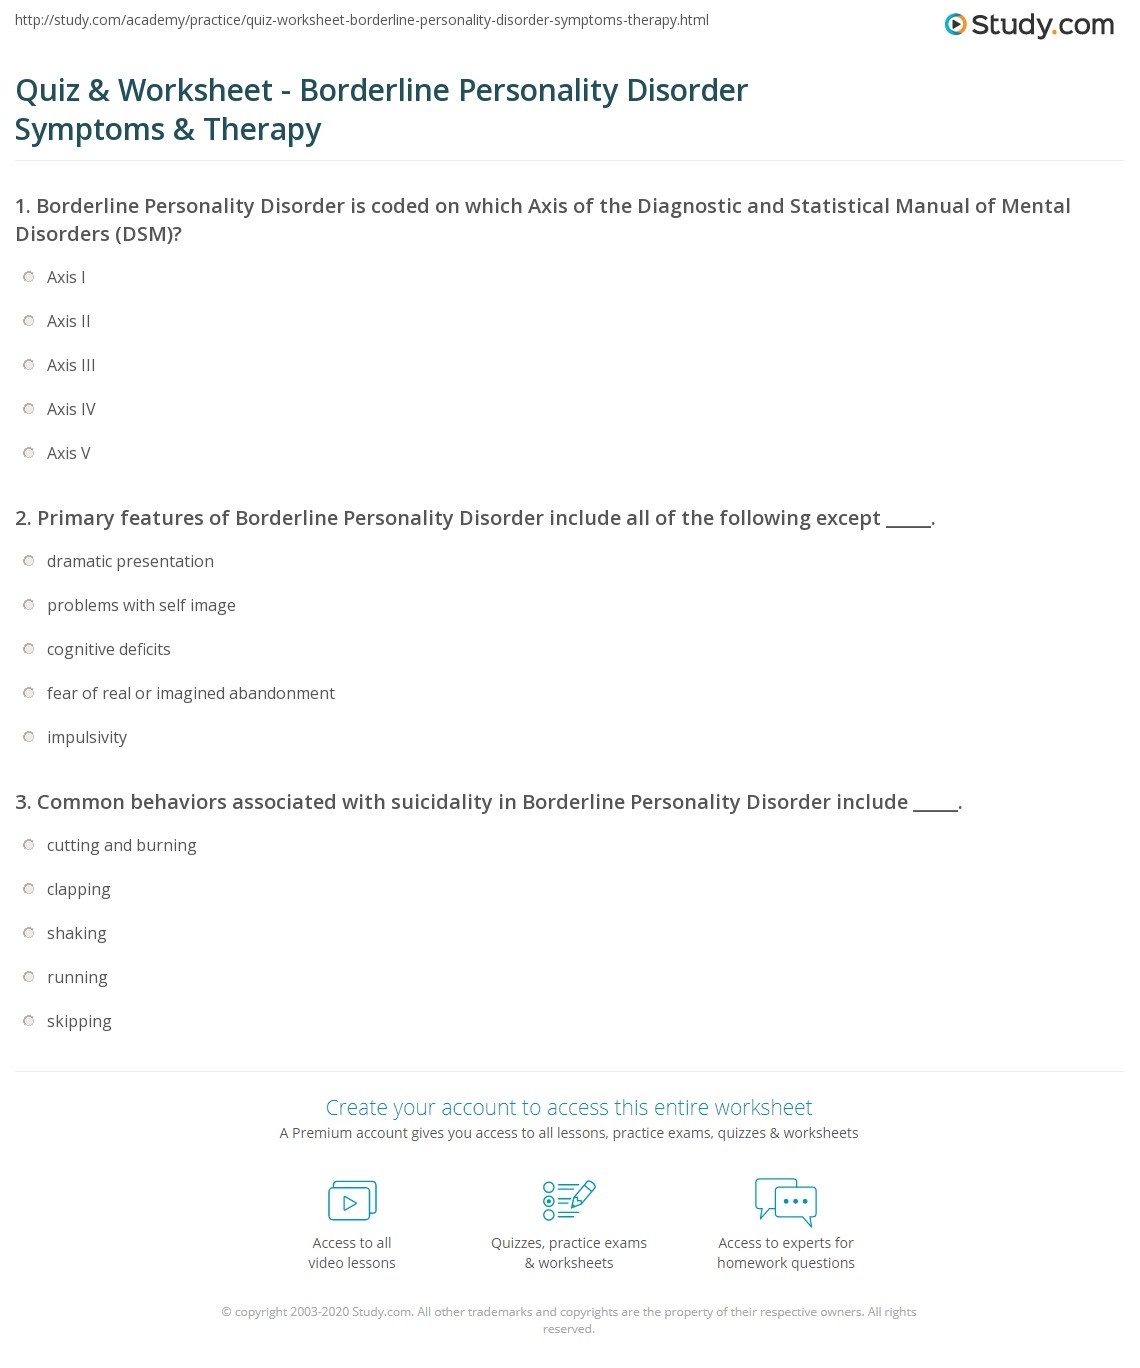 Quiz Worksheet Borderline Personality Disorder Symptoms Therapy Study